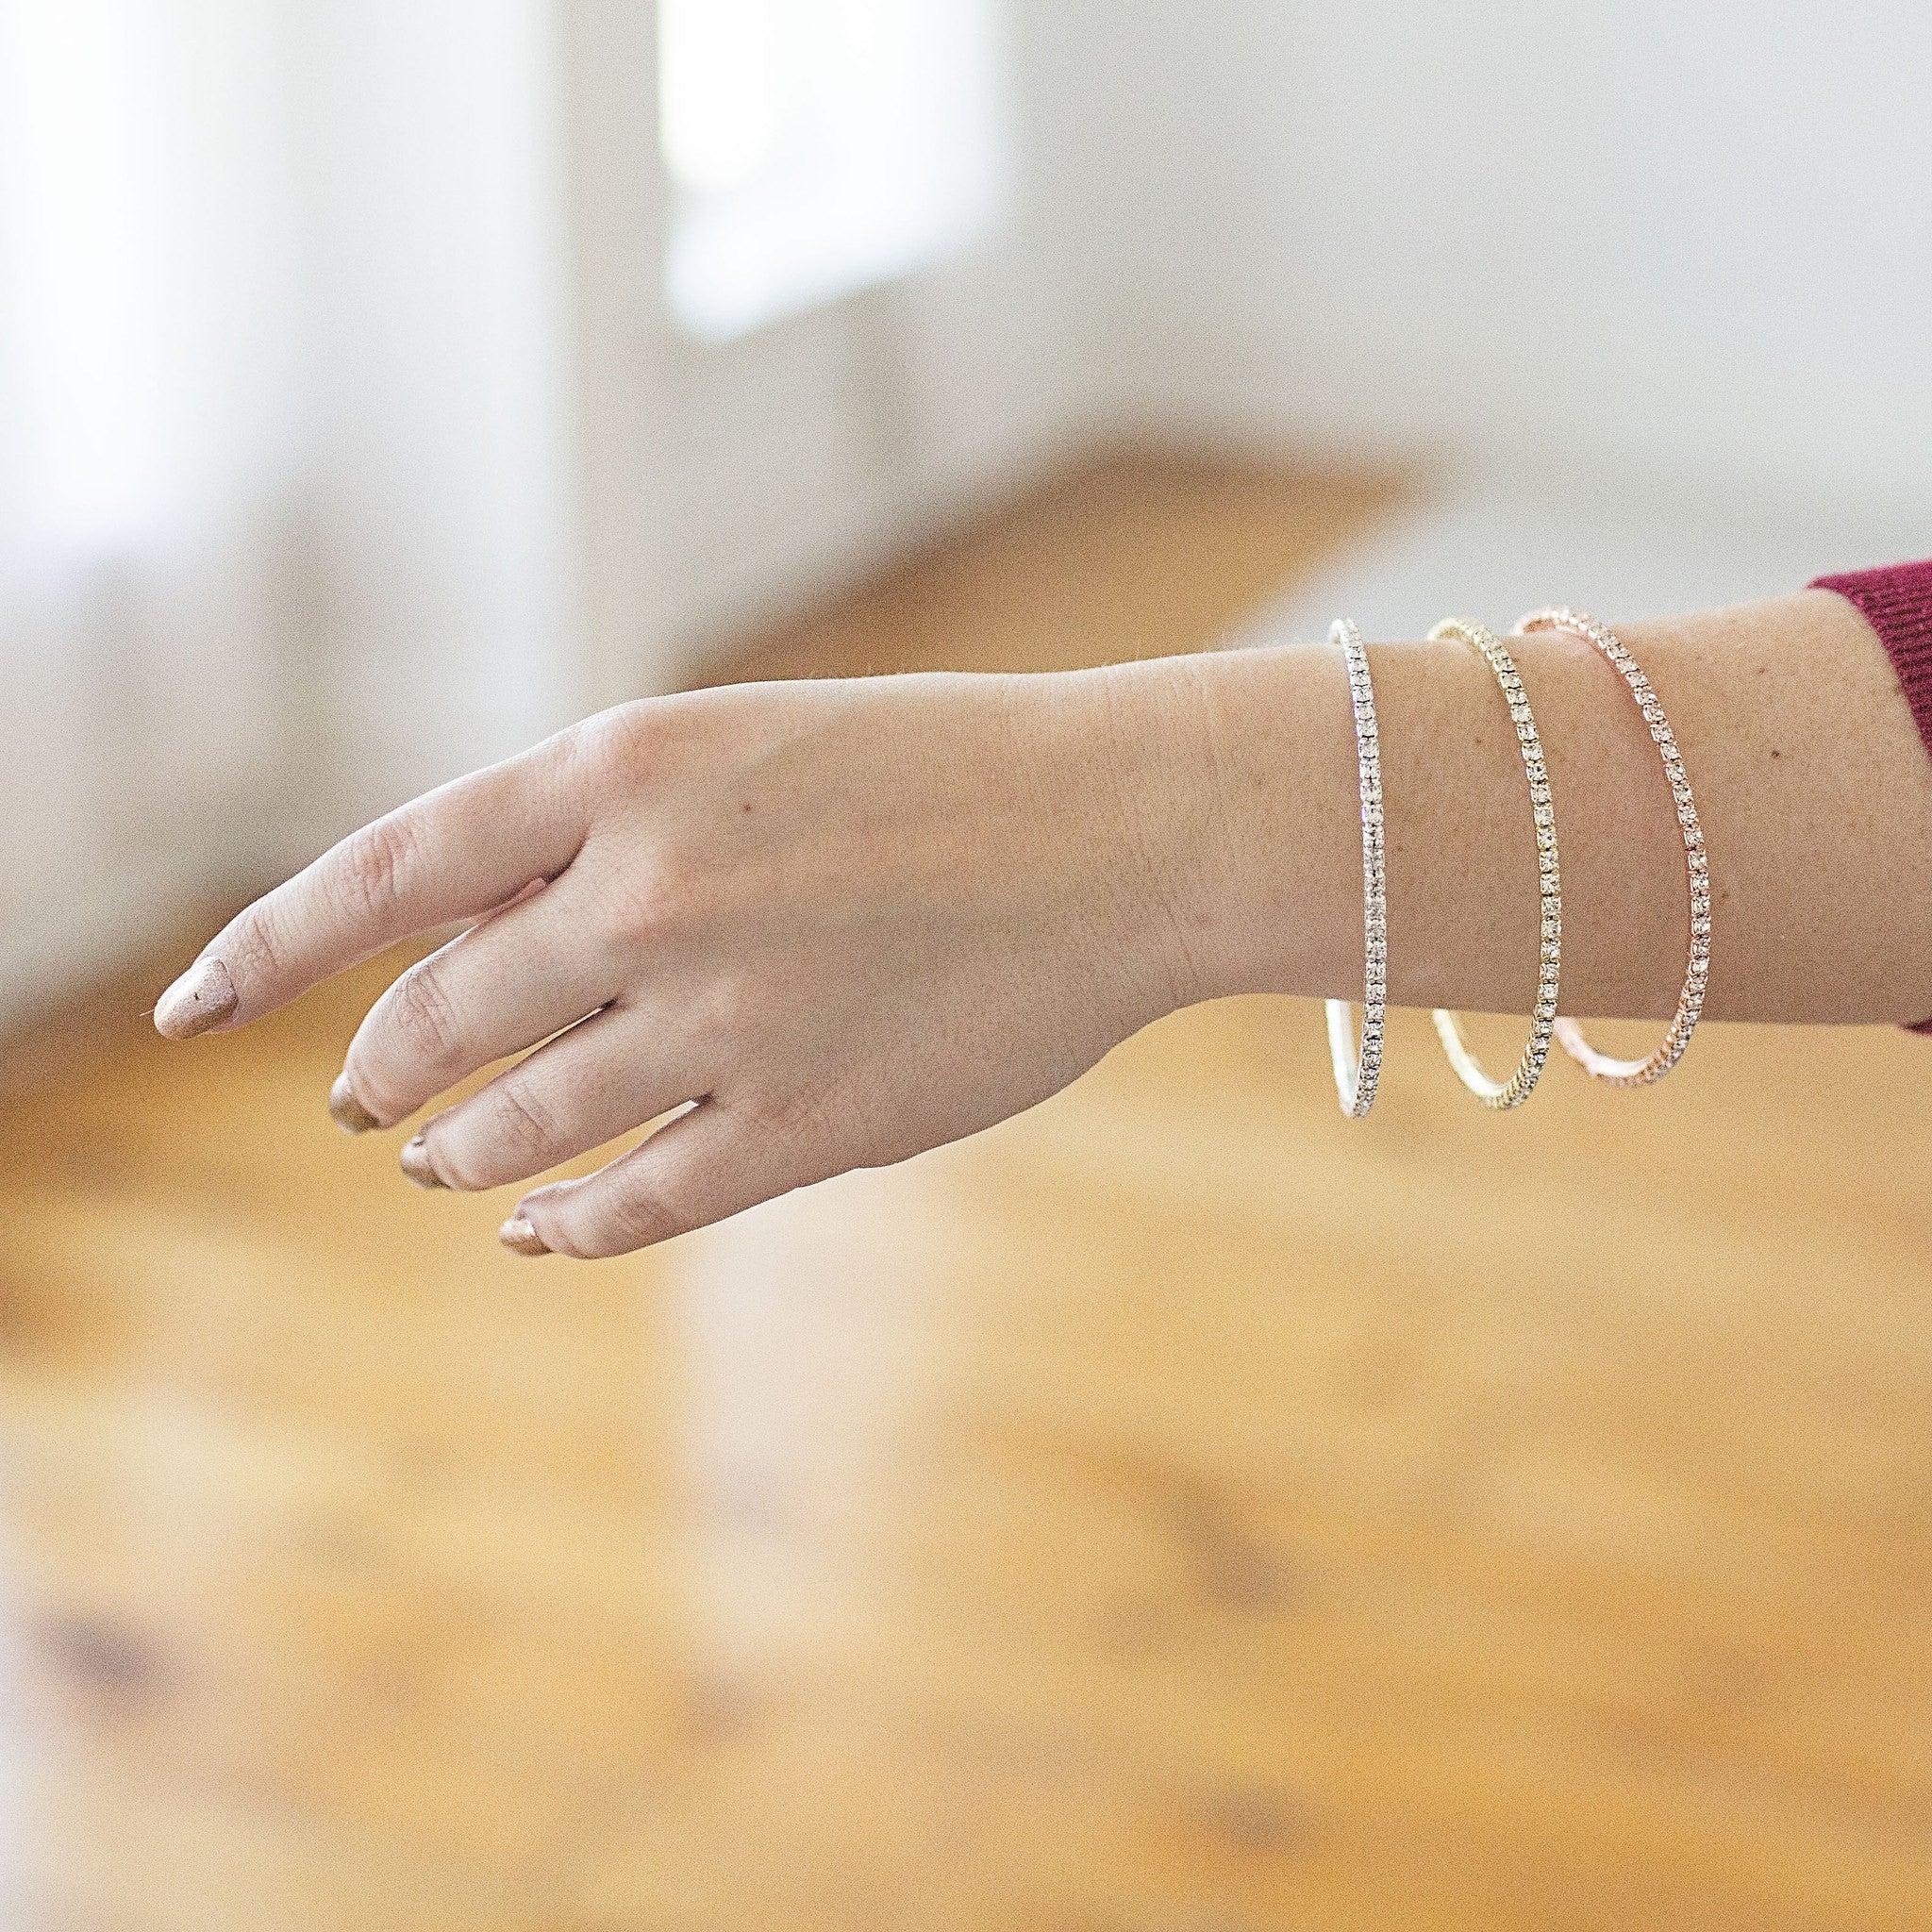 Crystal Bangle Set in Gold, Rose Gold and Silver